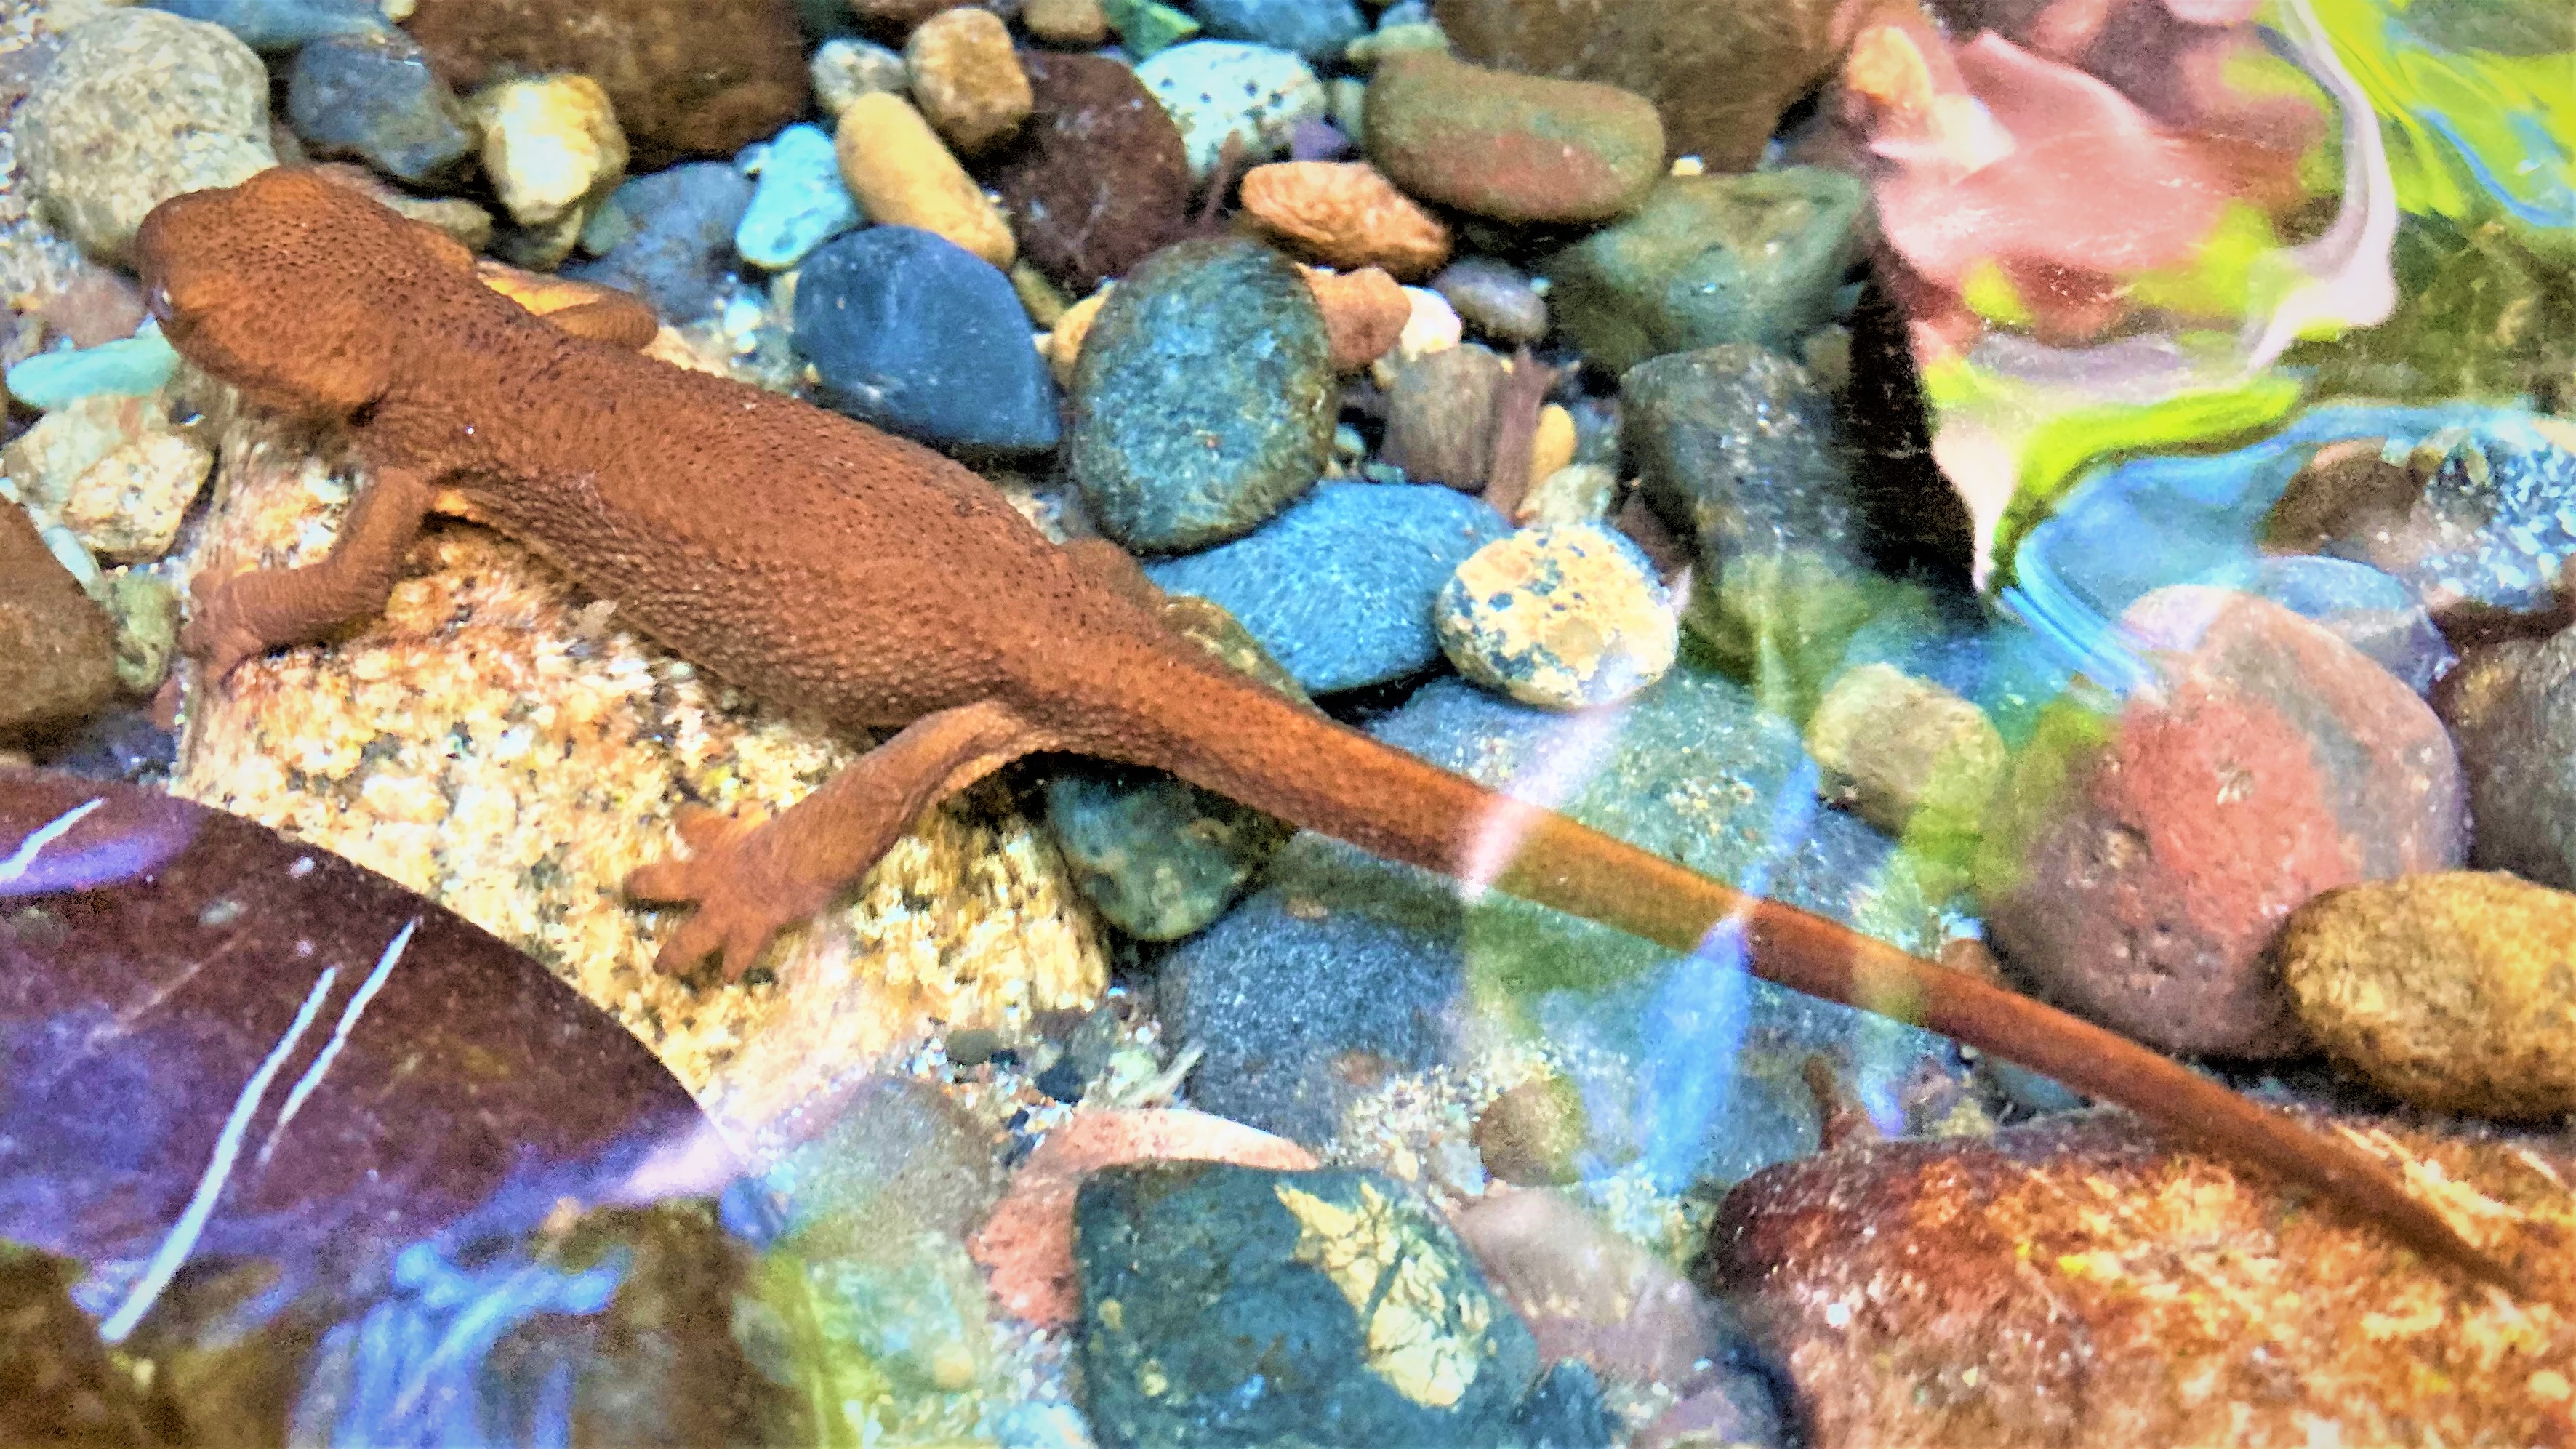 A closeup view of an orange newt in the water of a rocky stream